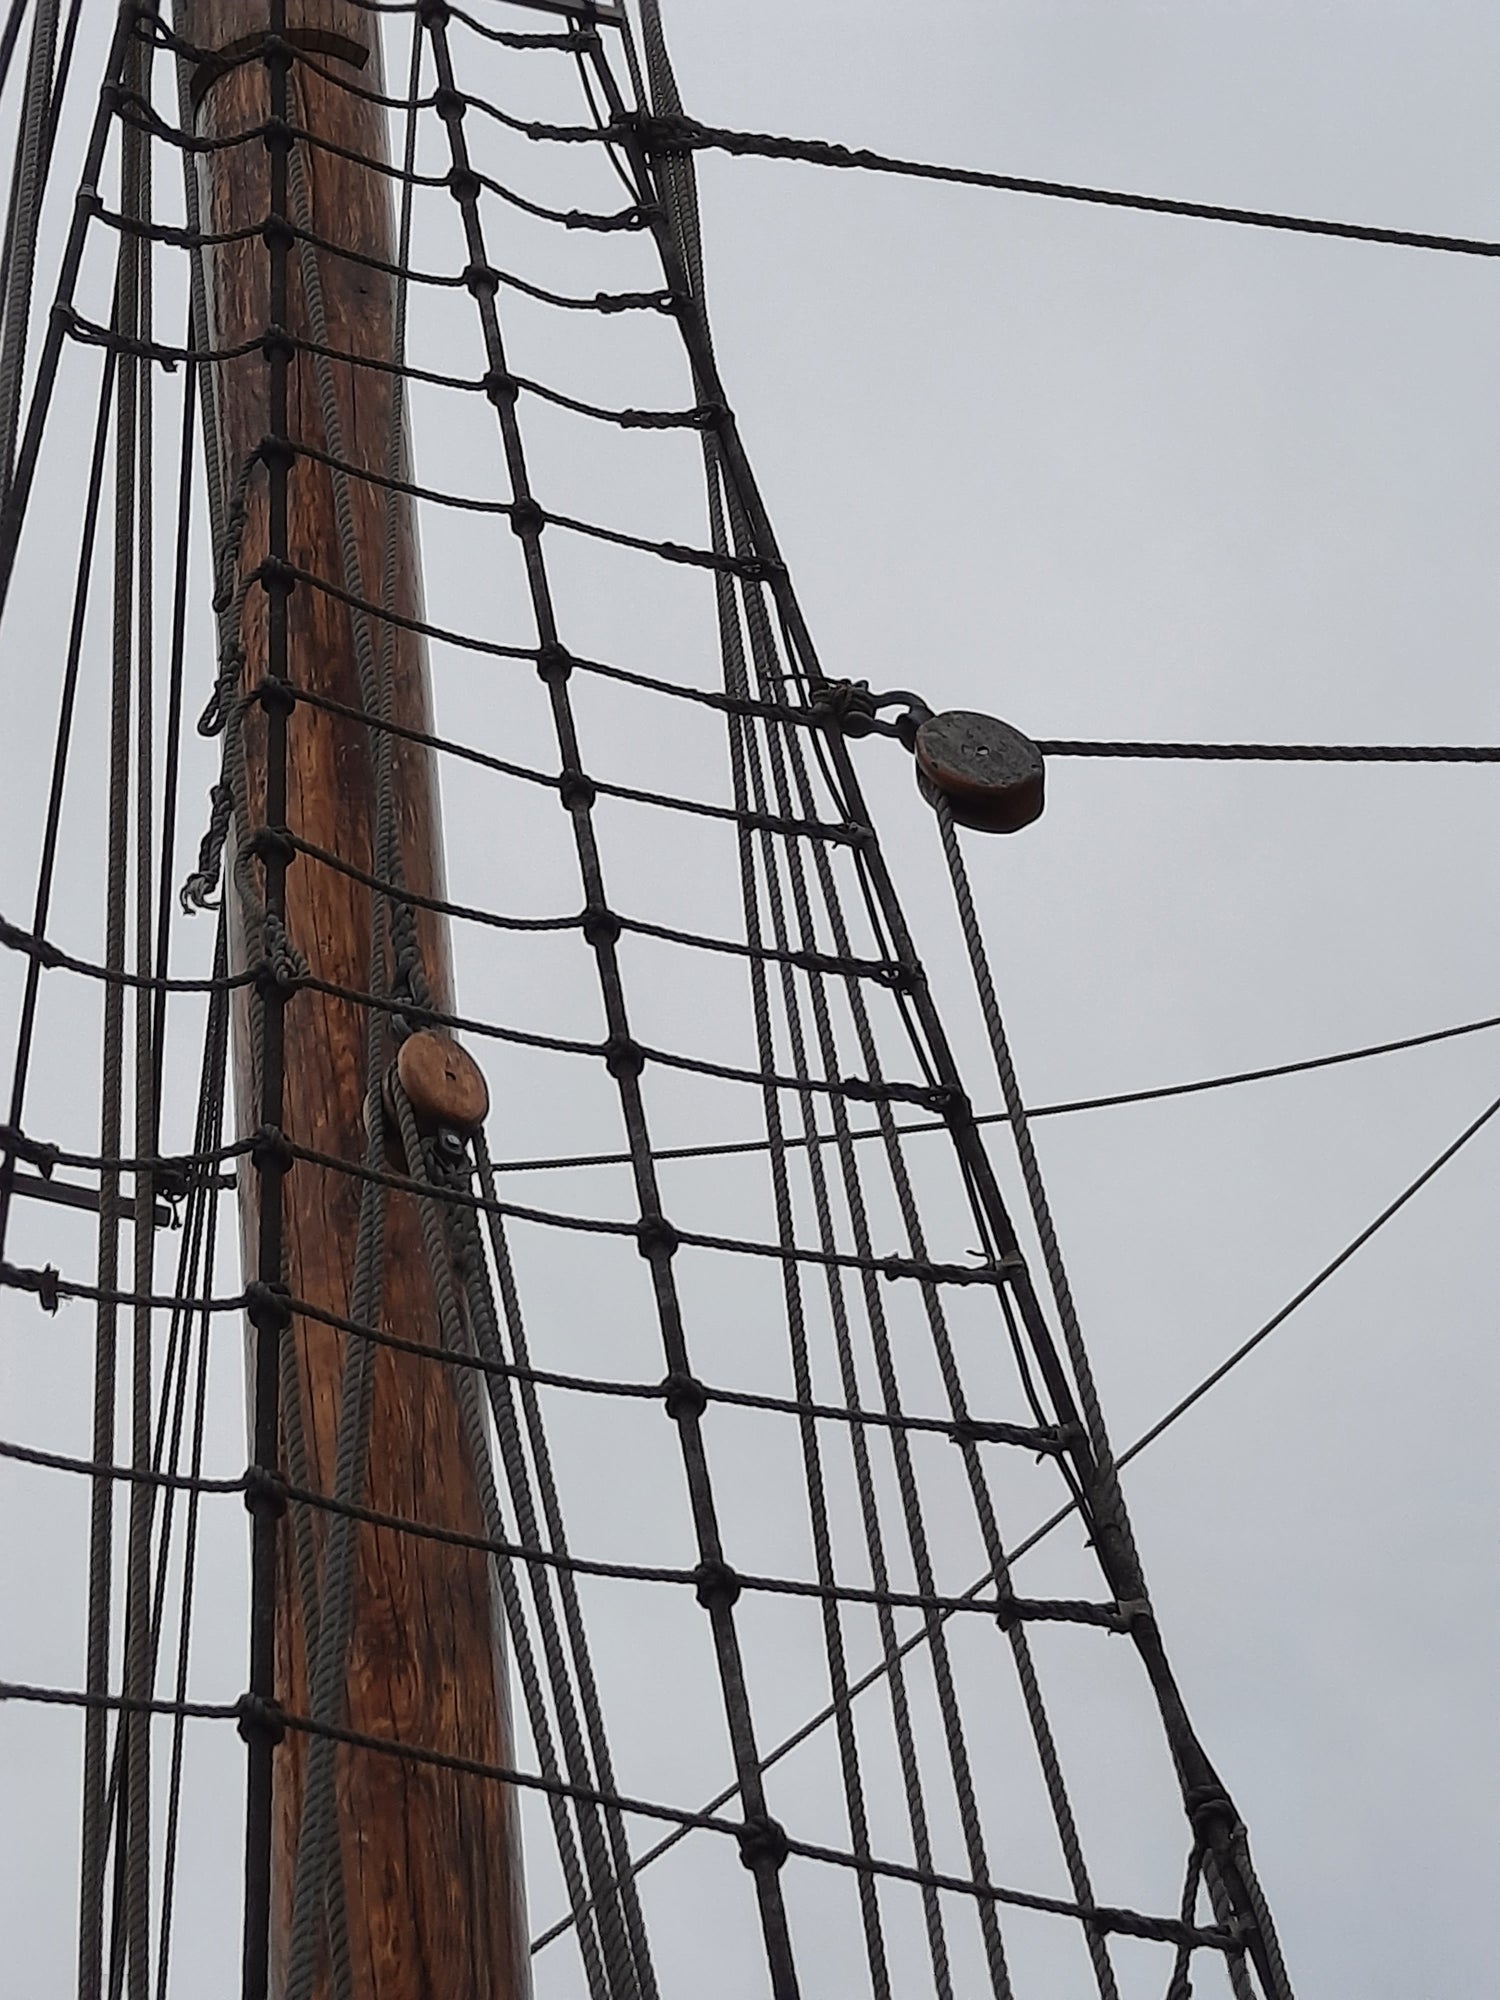 Old Ship wooden Mast ropes traditional rigging